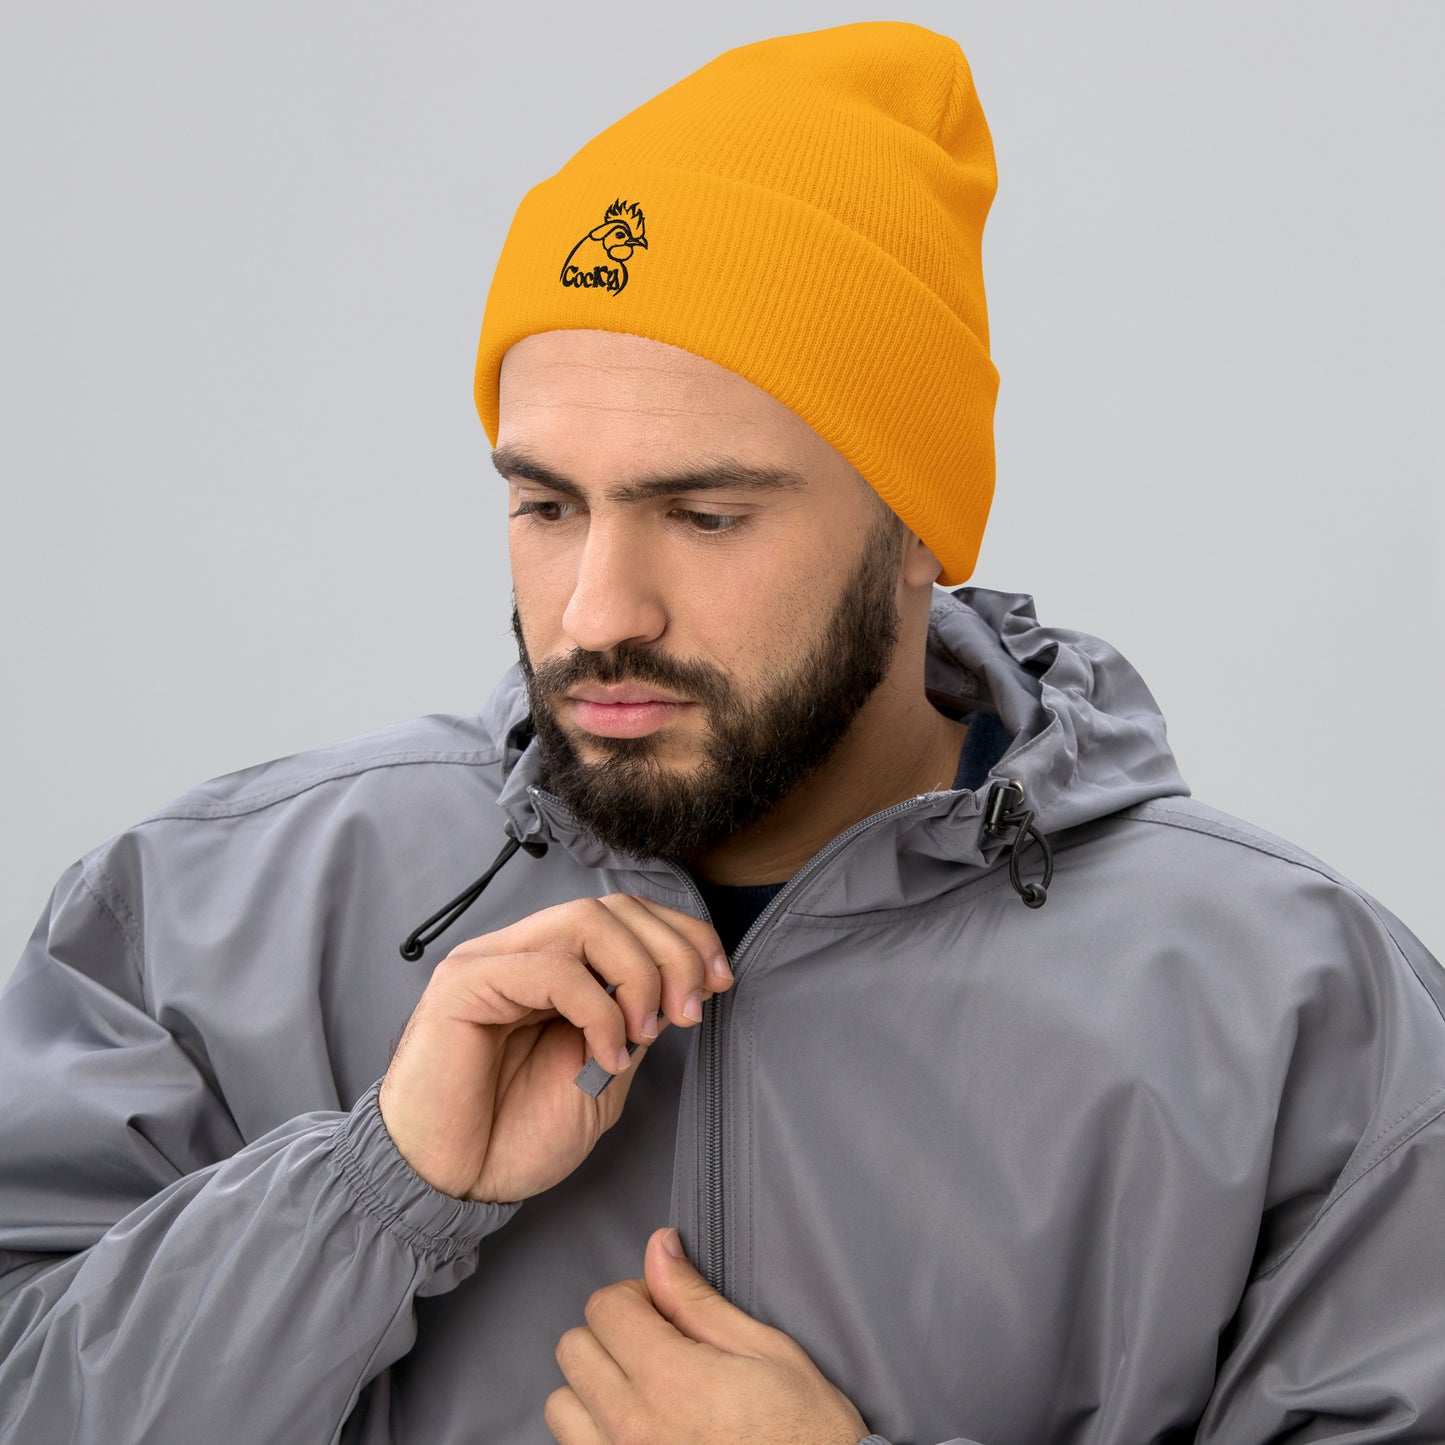 VEGAN " Cocky" Embroidered Cuffed Beanie